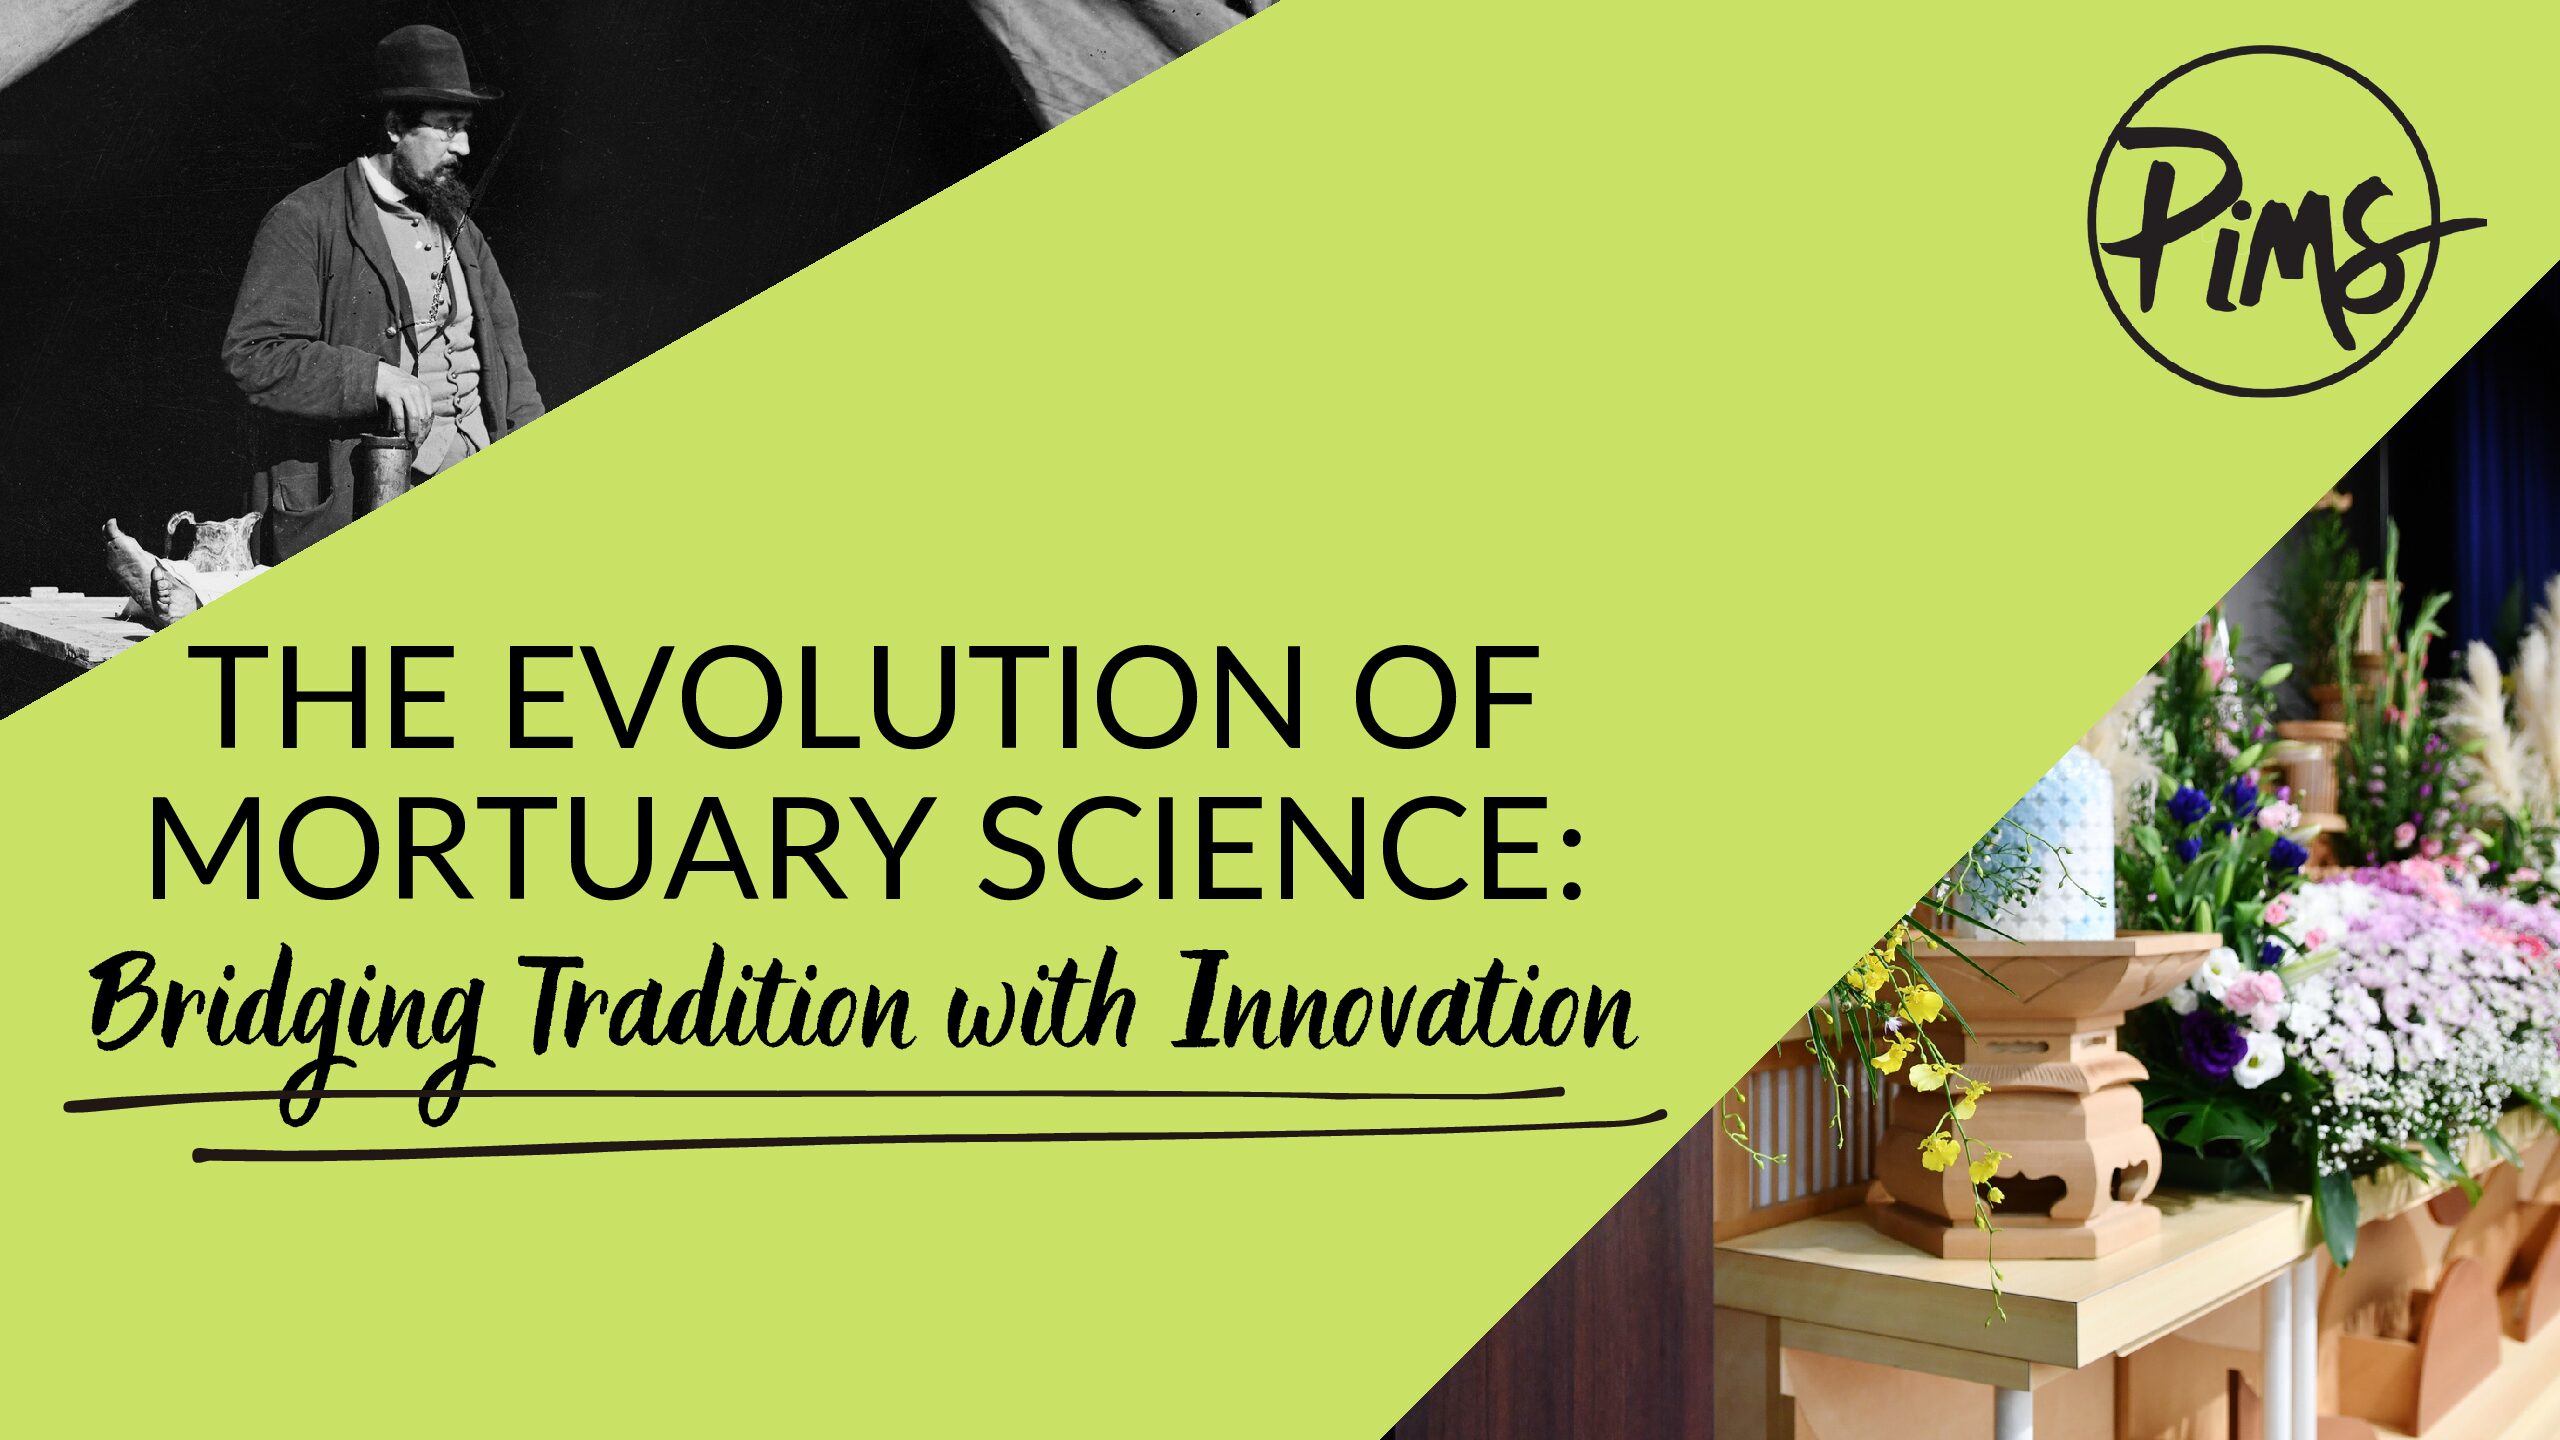 The Evolution of Mortuary Science: Bridging Tradition with Innovation